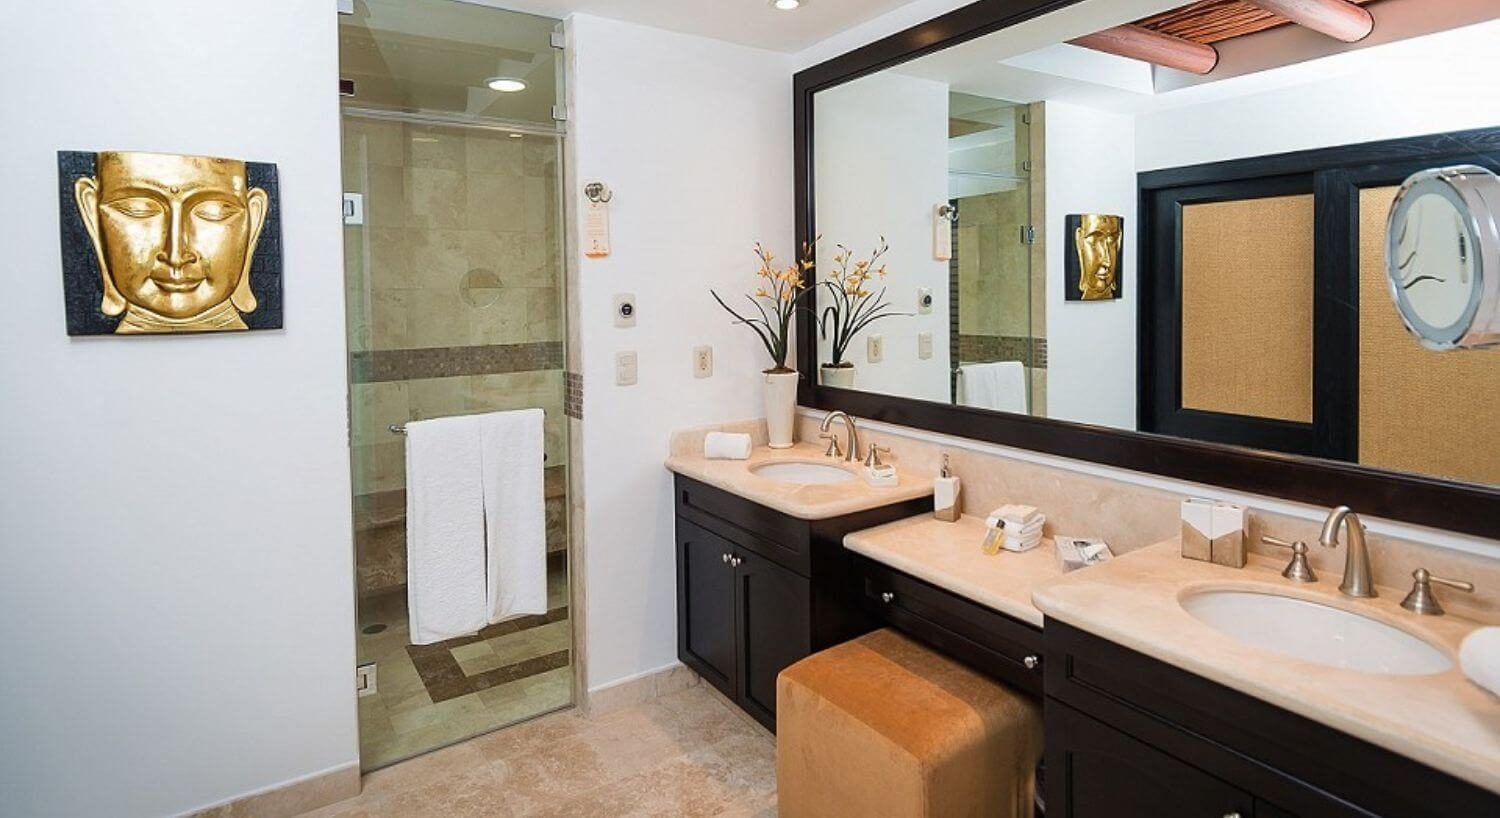 A bathroom with double vanity sinks with dark brown cupboards and granite countertops, with a vanity and ottoman in between them, and a walk in shower with clear glass door and white towels.